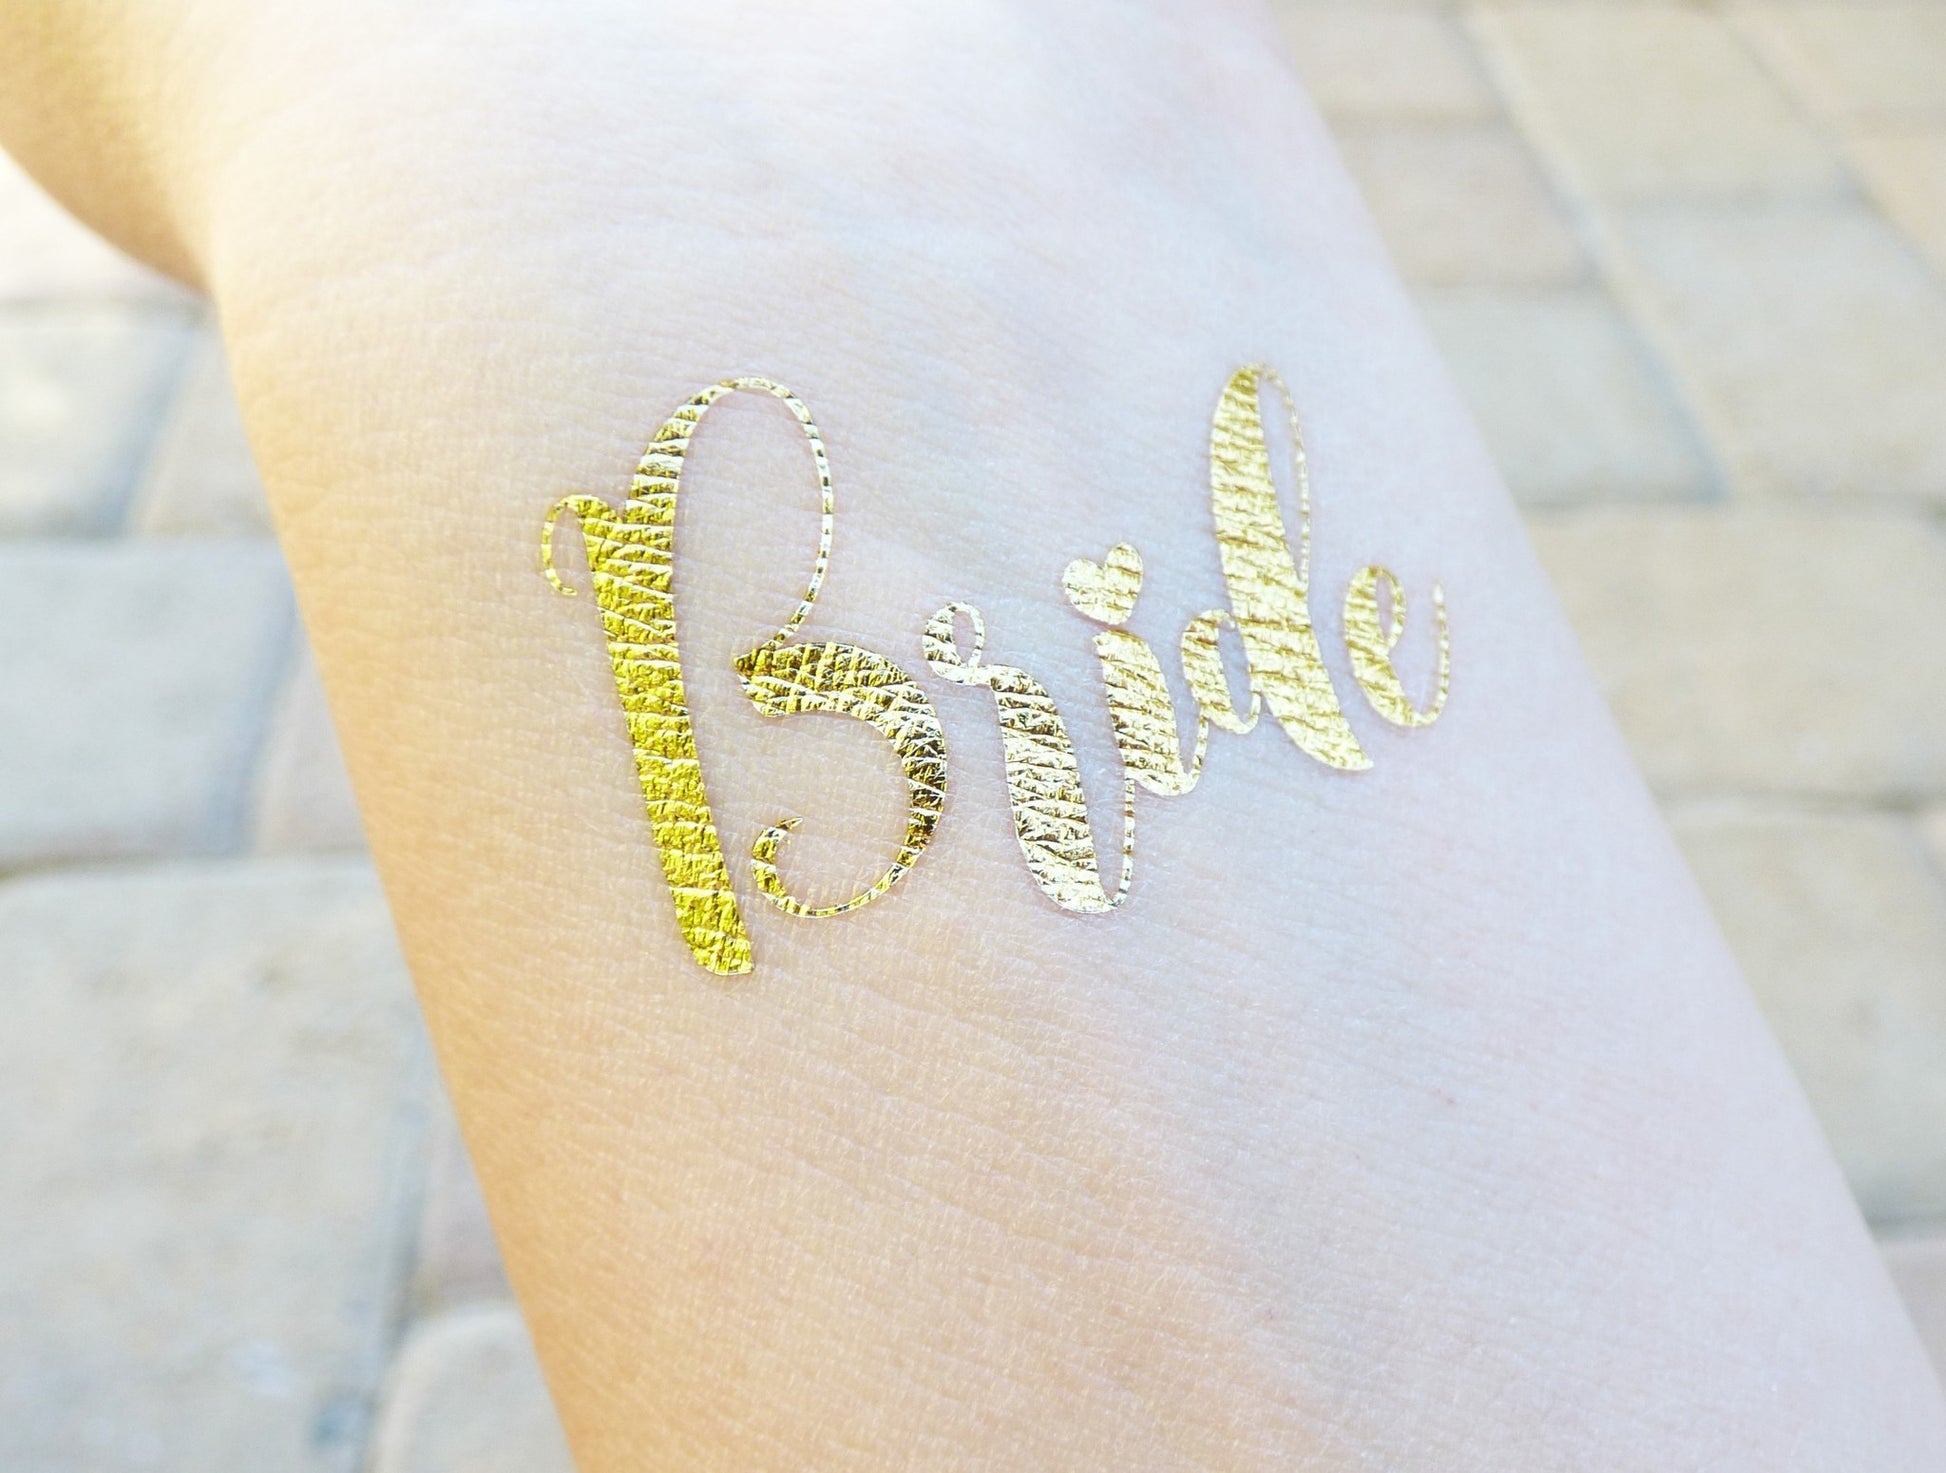 Bride temporary tattoo on wrist for bachelorette party